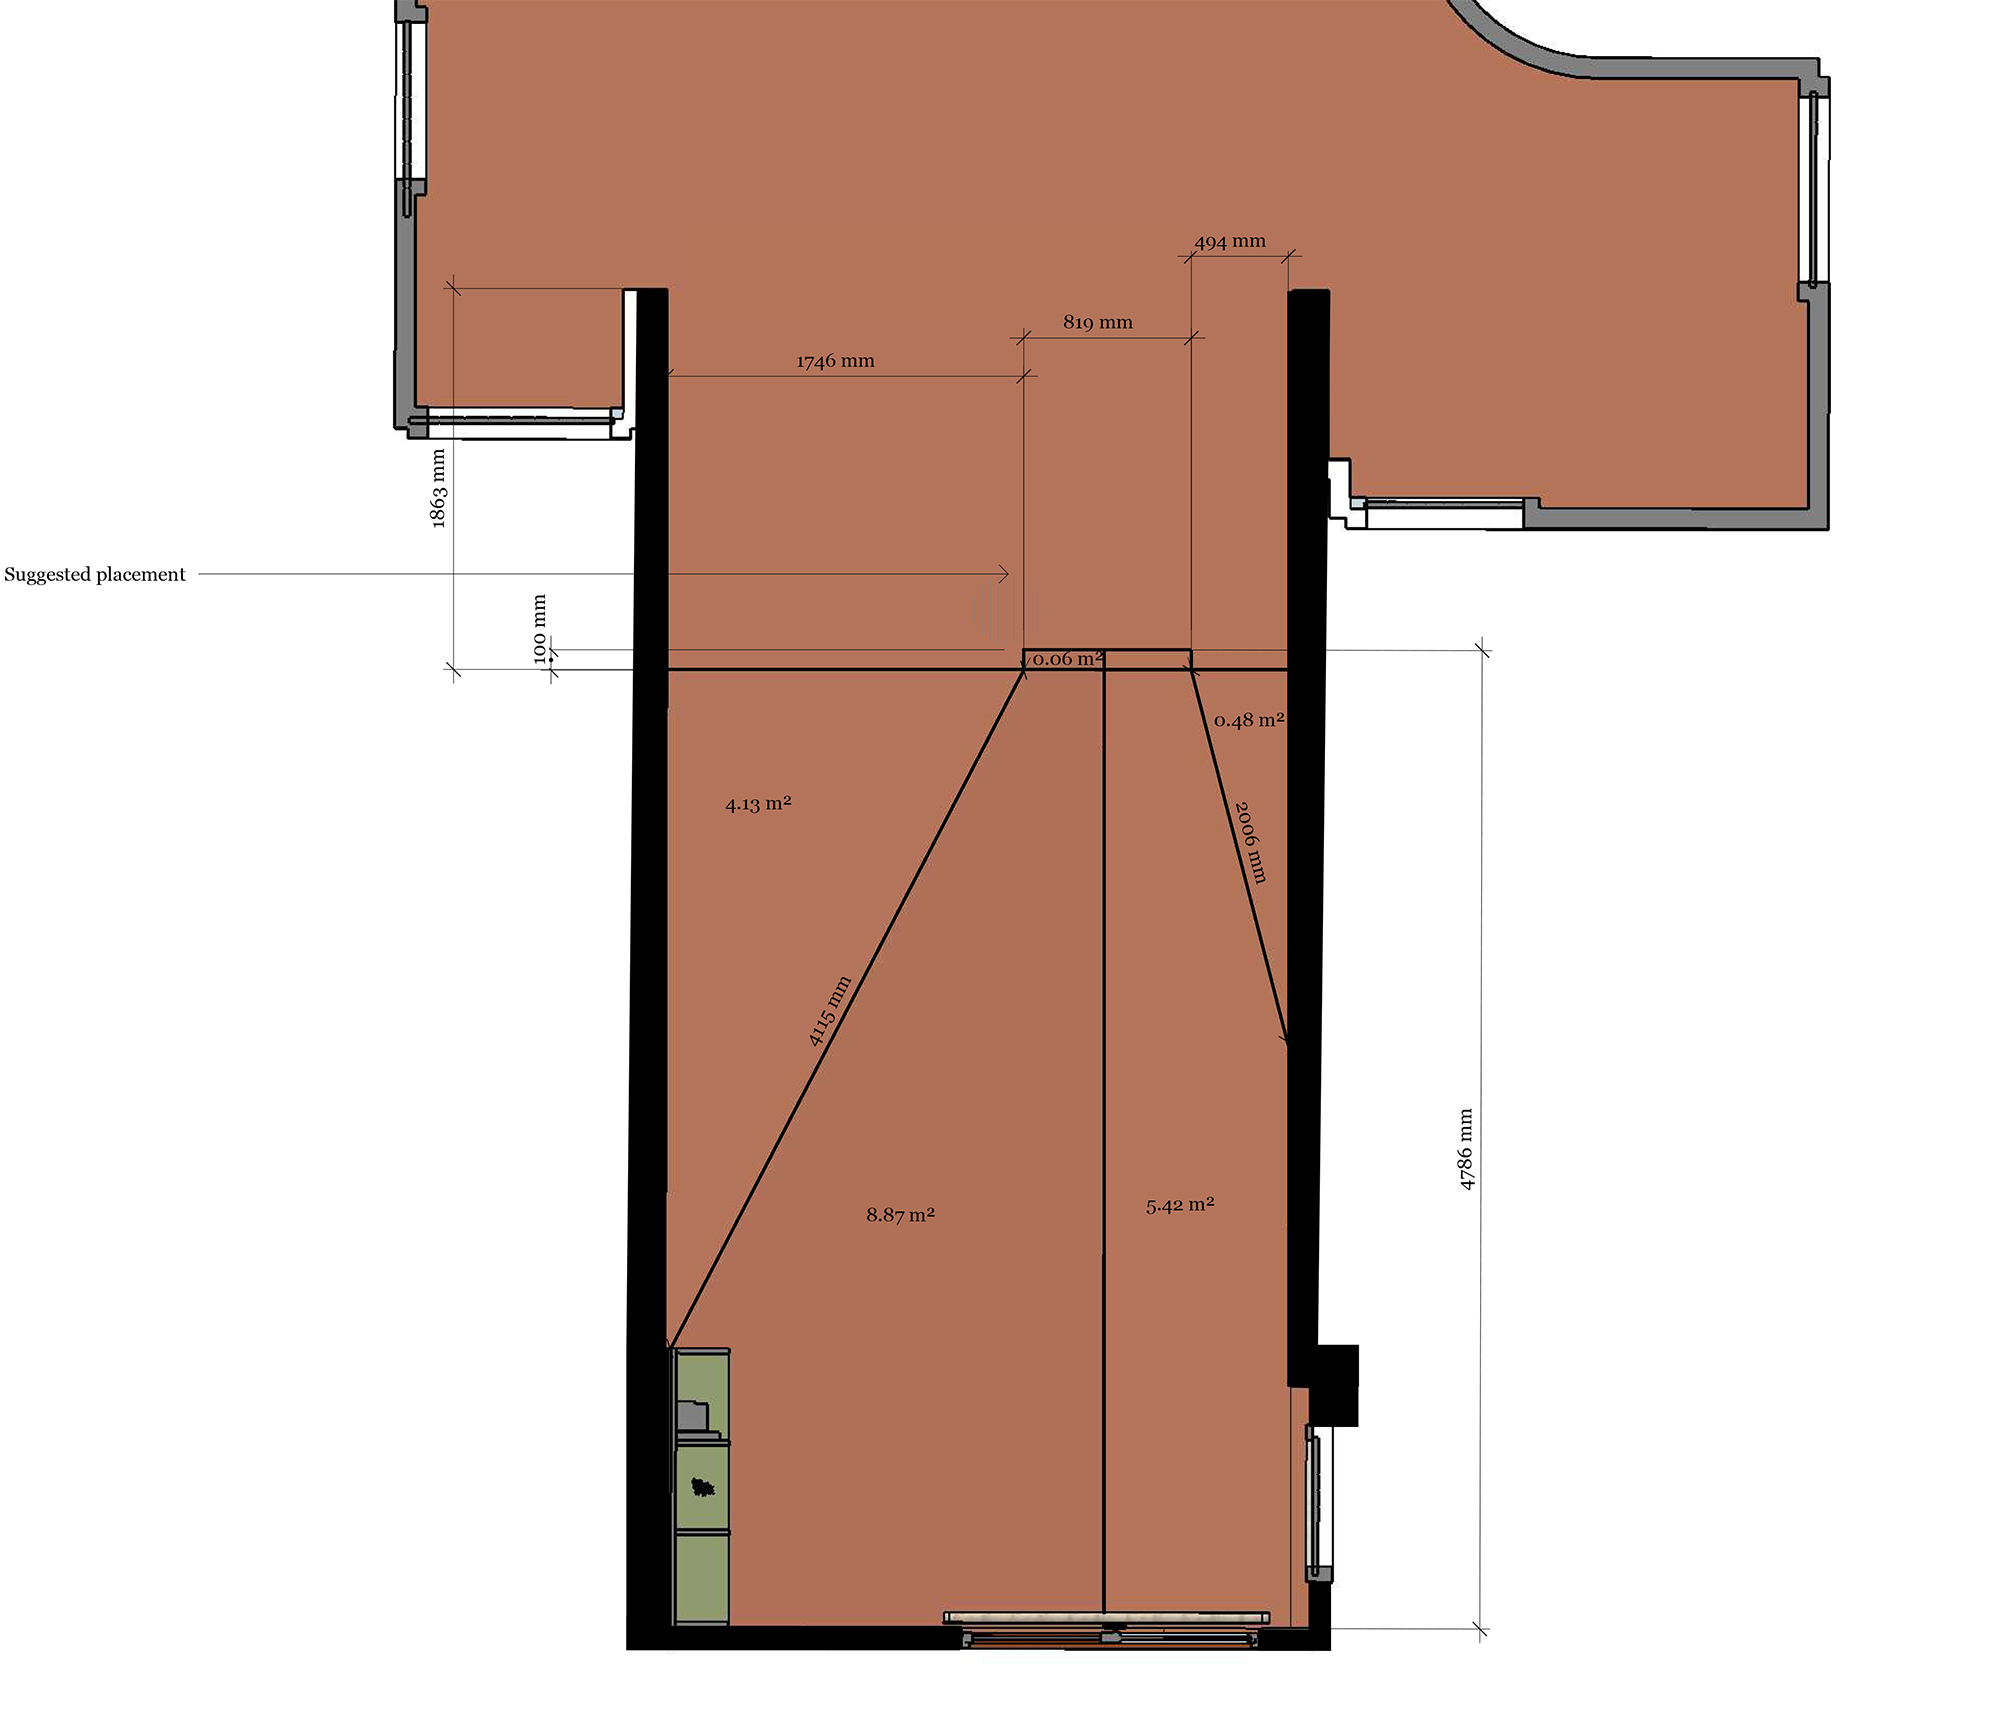 A floor plan of the hallway showing the dimensions of the space.